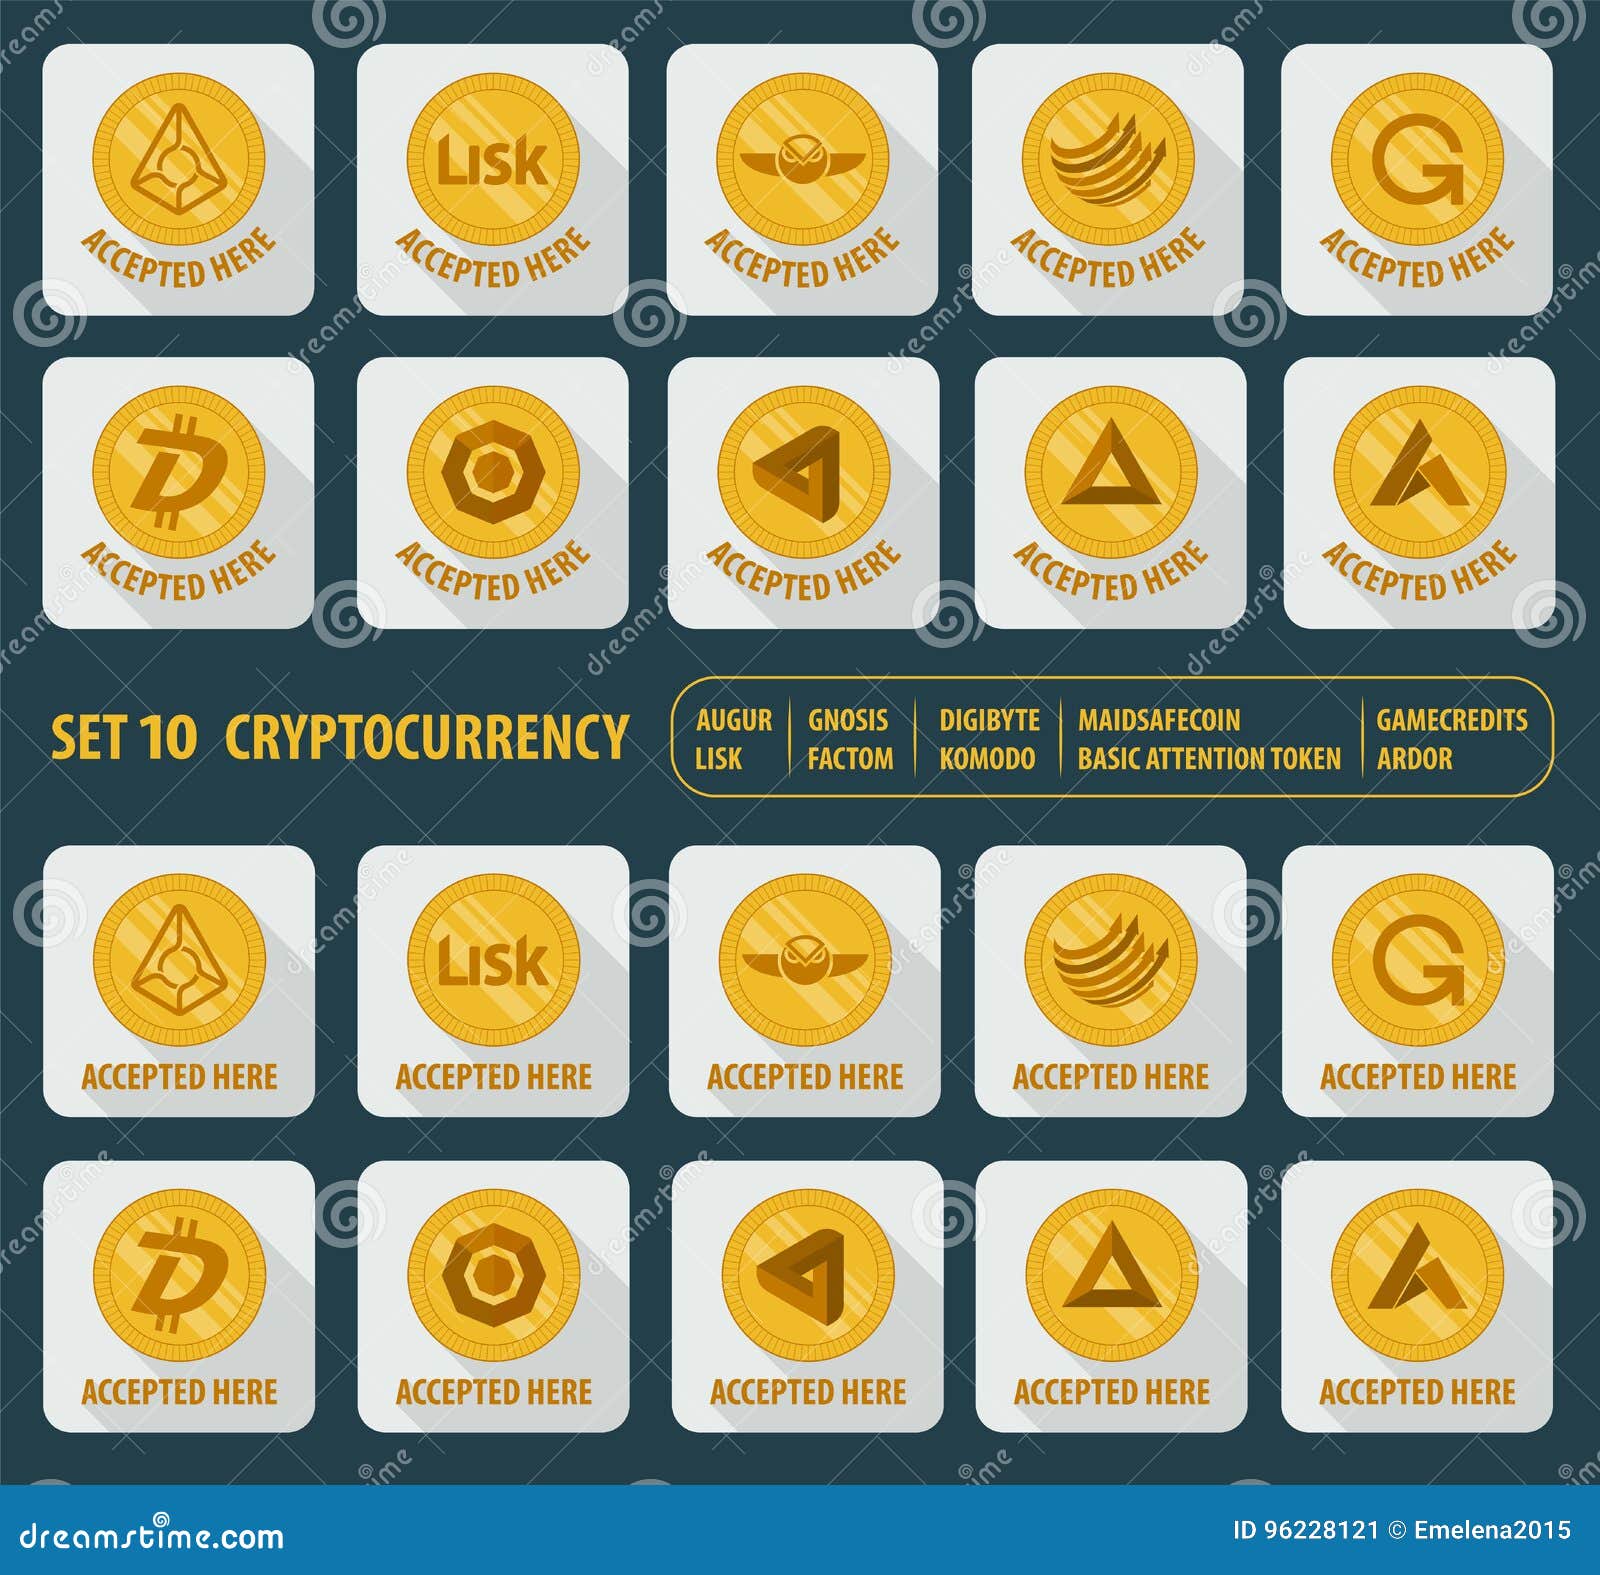 Set Of Ten Different Cryptocurrency Icons On A Light ...